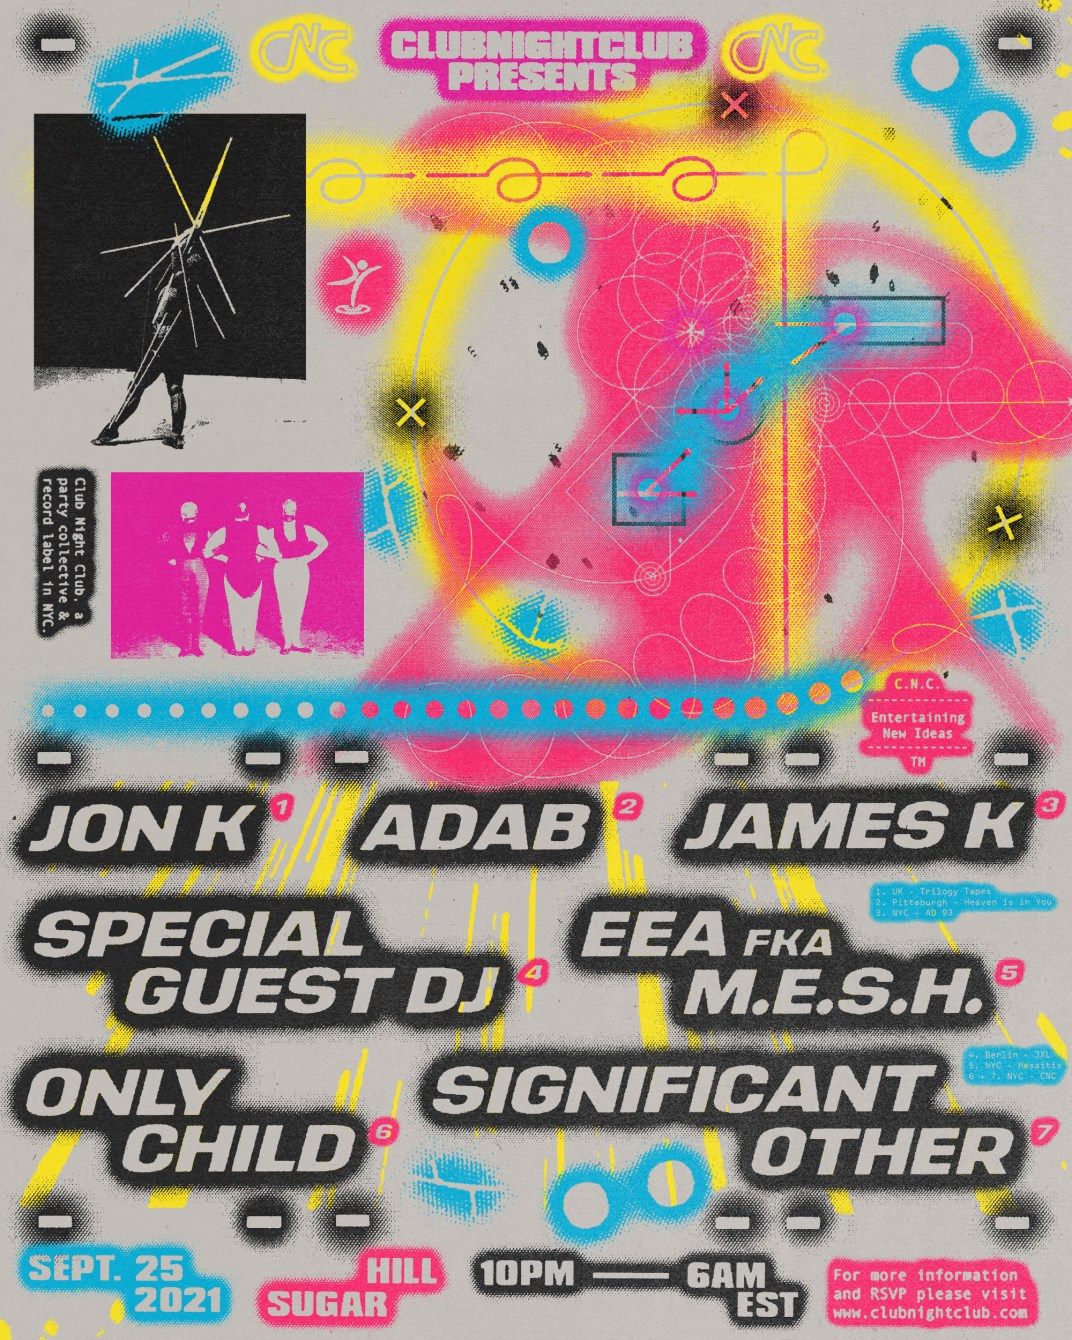 Club Night Club: Jon K, EEA (M.E.S.H.), Adab, James K - Flyer front